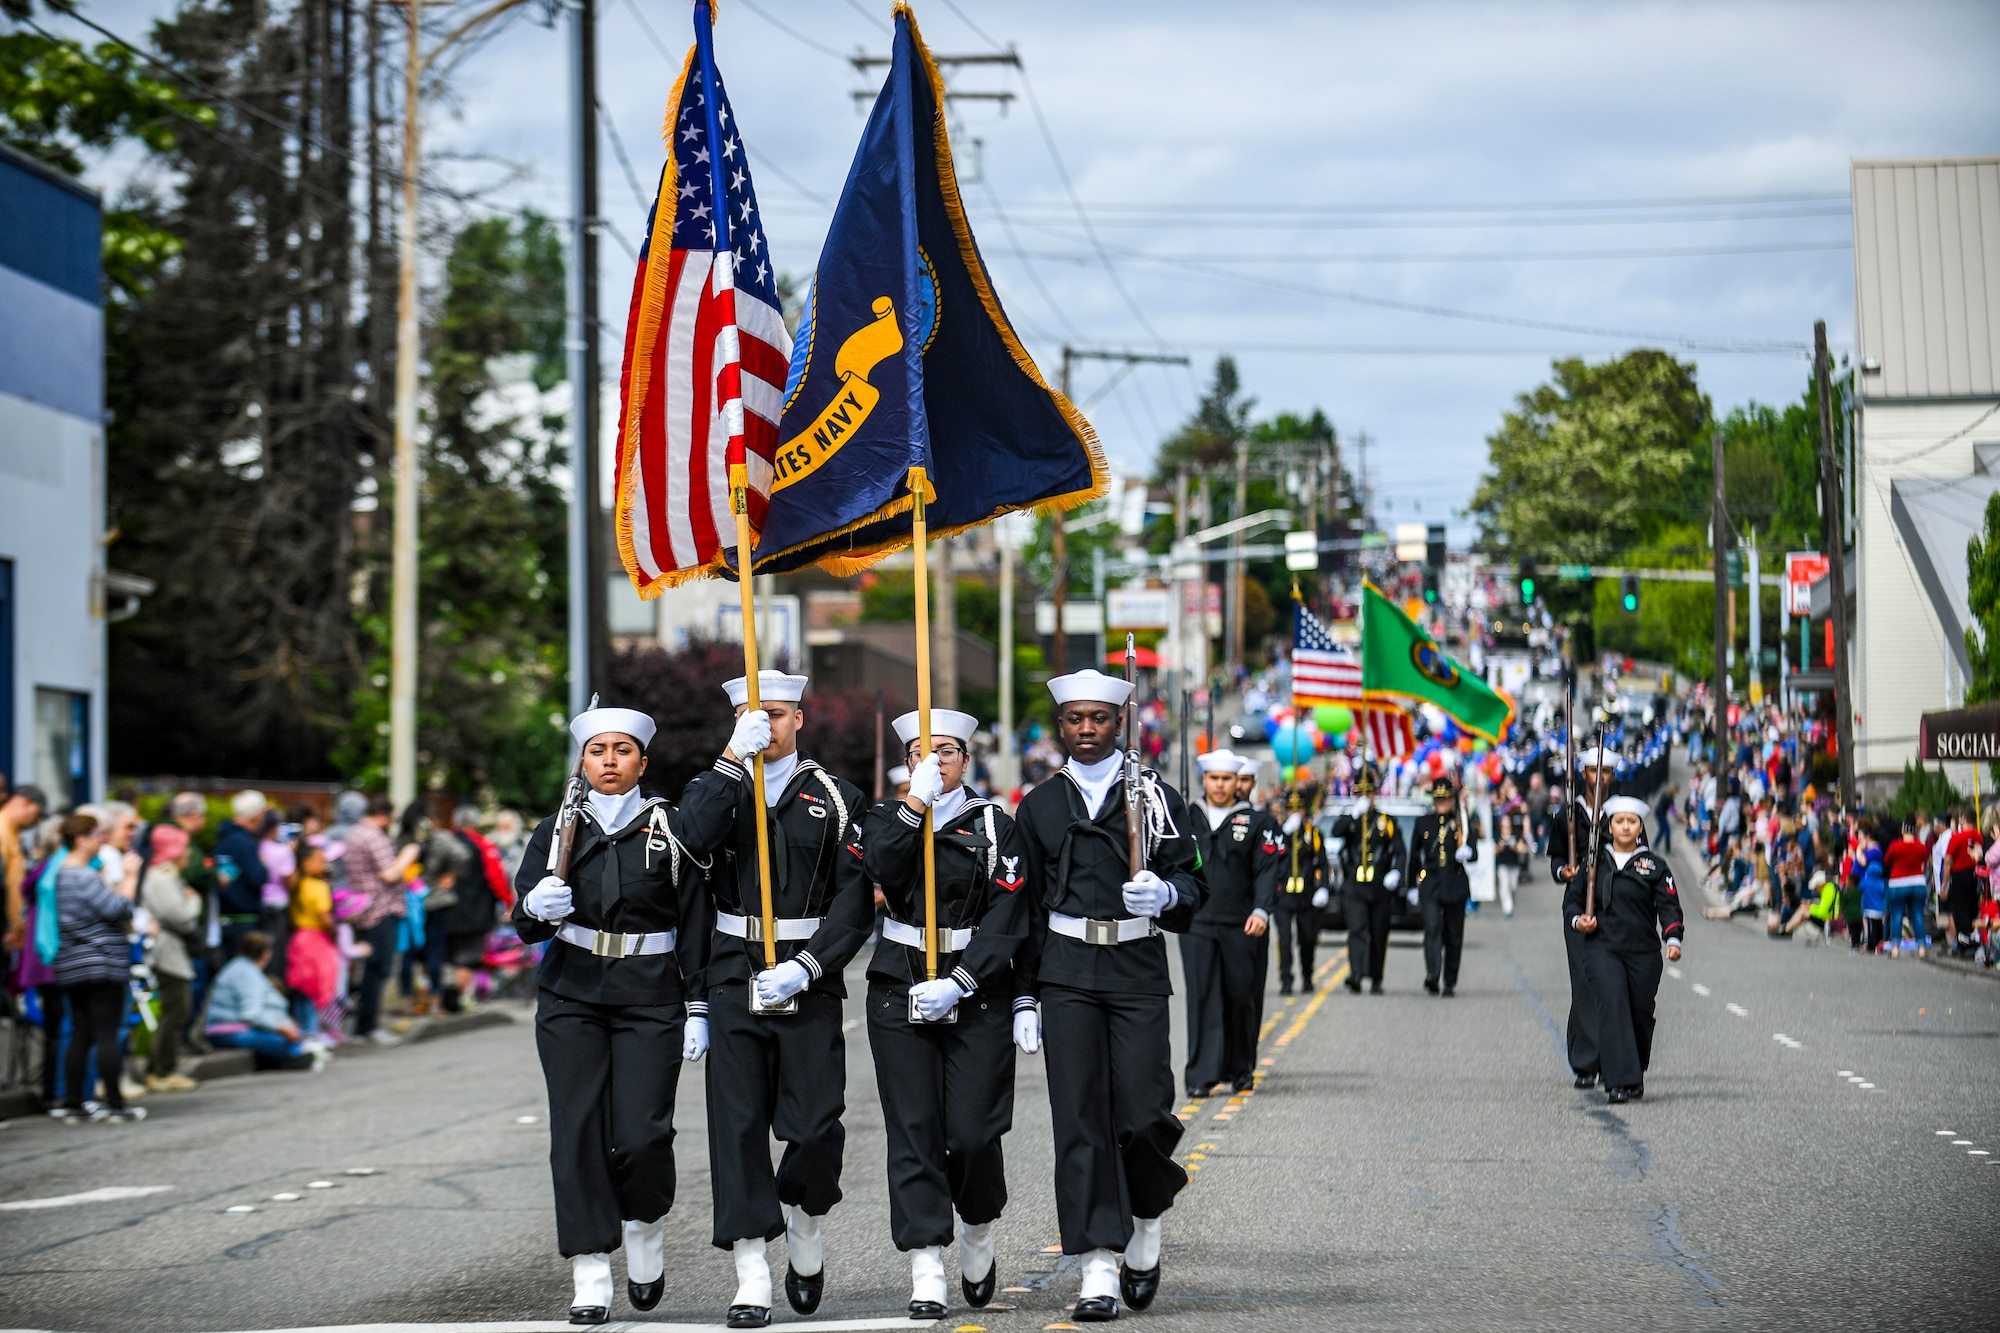 (May 18, 2019) - Aircraft carrier USS Nimitz's (CVN 68) Honor Guard leads the participants of the 72nd Kitsap Credit Union Armed Forces Day Parade down 6th Street. The Kitsap Credit Union Armed Forces Day Parade, held on the third Saturday in May in downtown Bremerton, has an annual attendance of 25,000-40,000 people and includes all branches of the military, police and firefighters, youth organizations, dignitaries, commercial businesses, car clubs and more. (U.S. Navy photo by Mass Communication Specialist 2nd Class Wyatt L. Anthony)